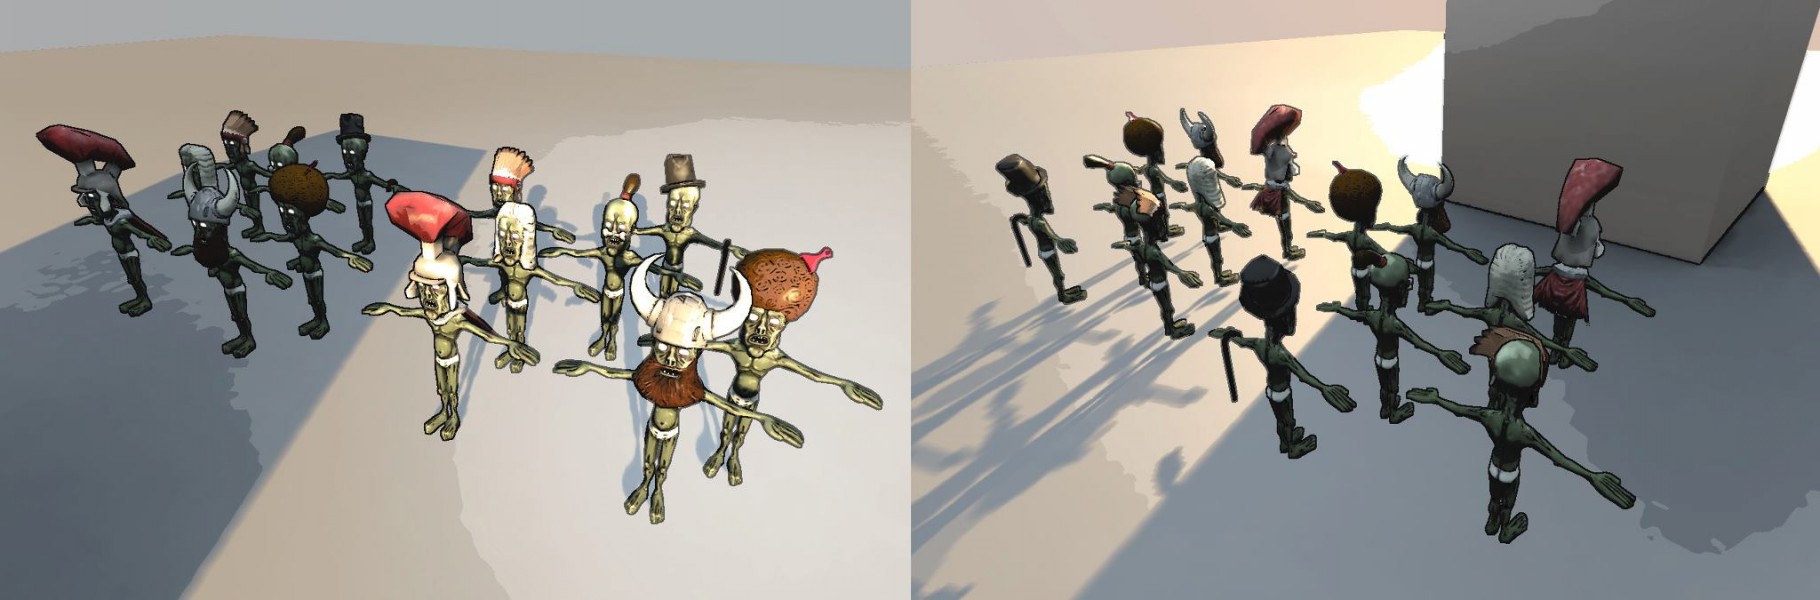 Dr. Necro's Time of Death - Zombies - A picture displaying the enemy in-game zombies, with various hats attached to the head socket of the character.